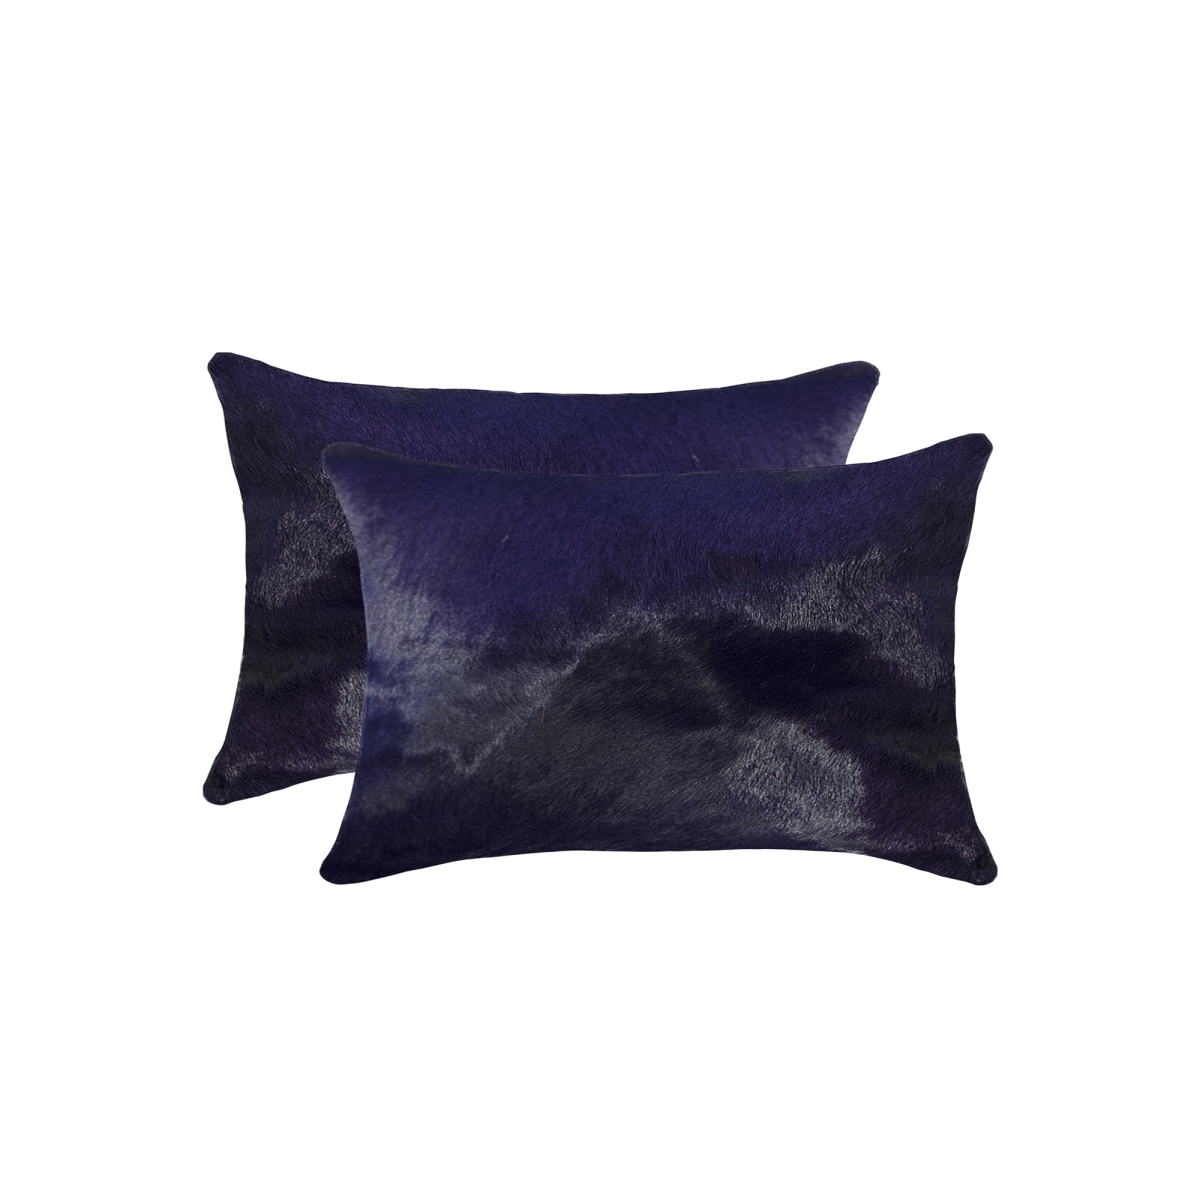 Picture of HomeRoots 317109 12 x 20 in. Cowhide Pillow, Purple - Pack of 2